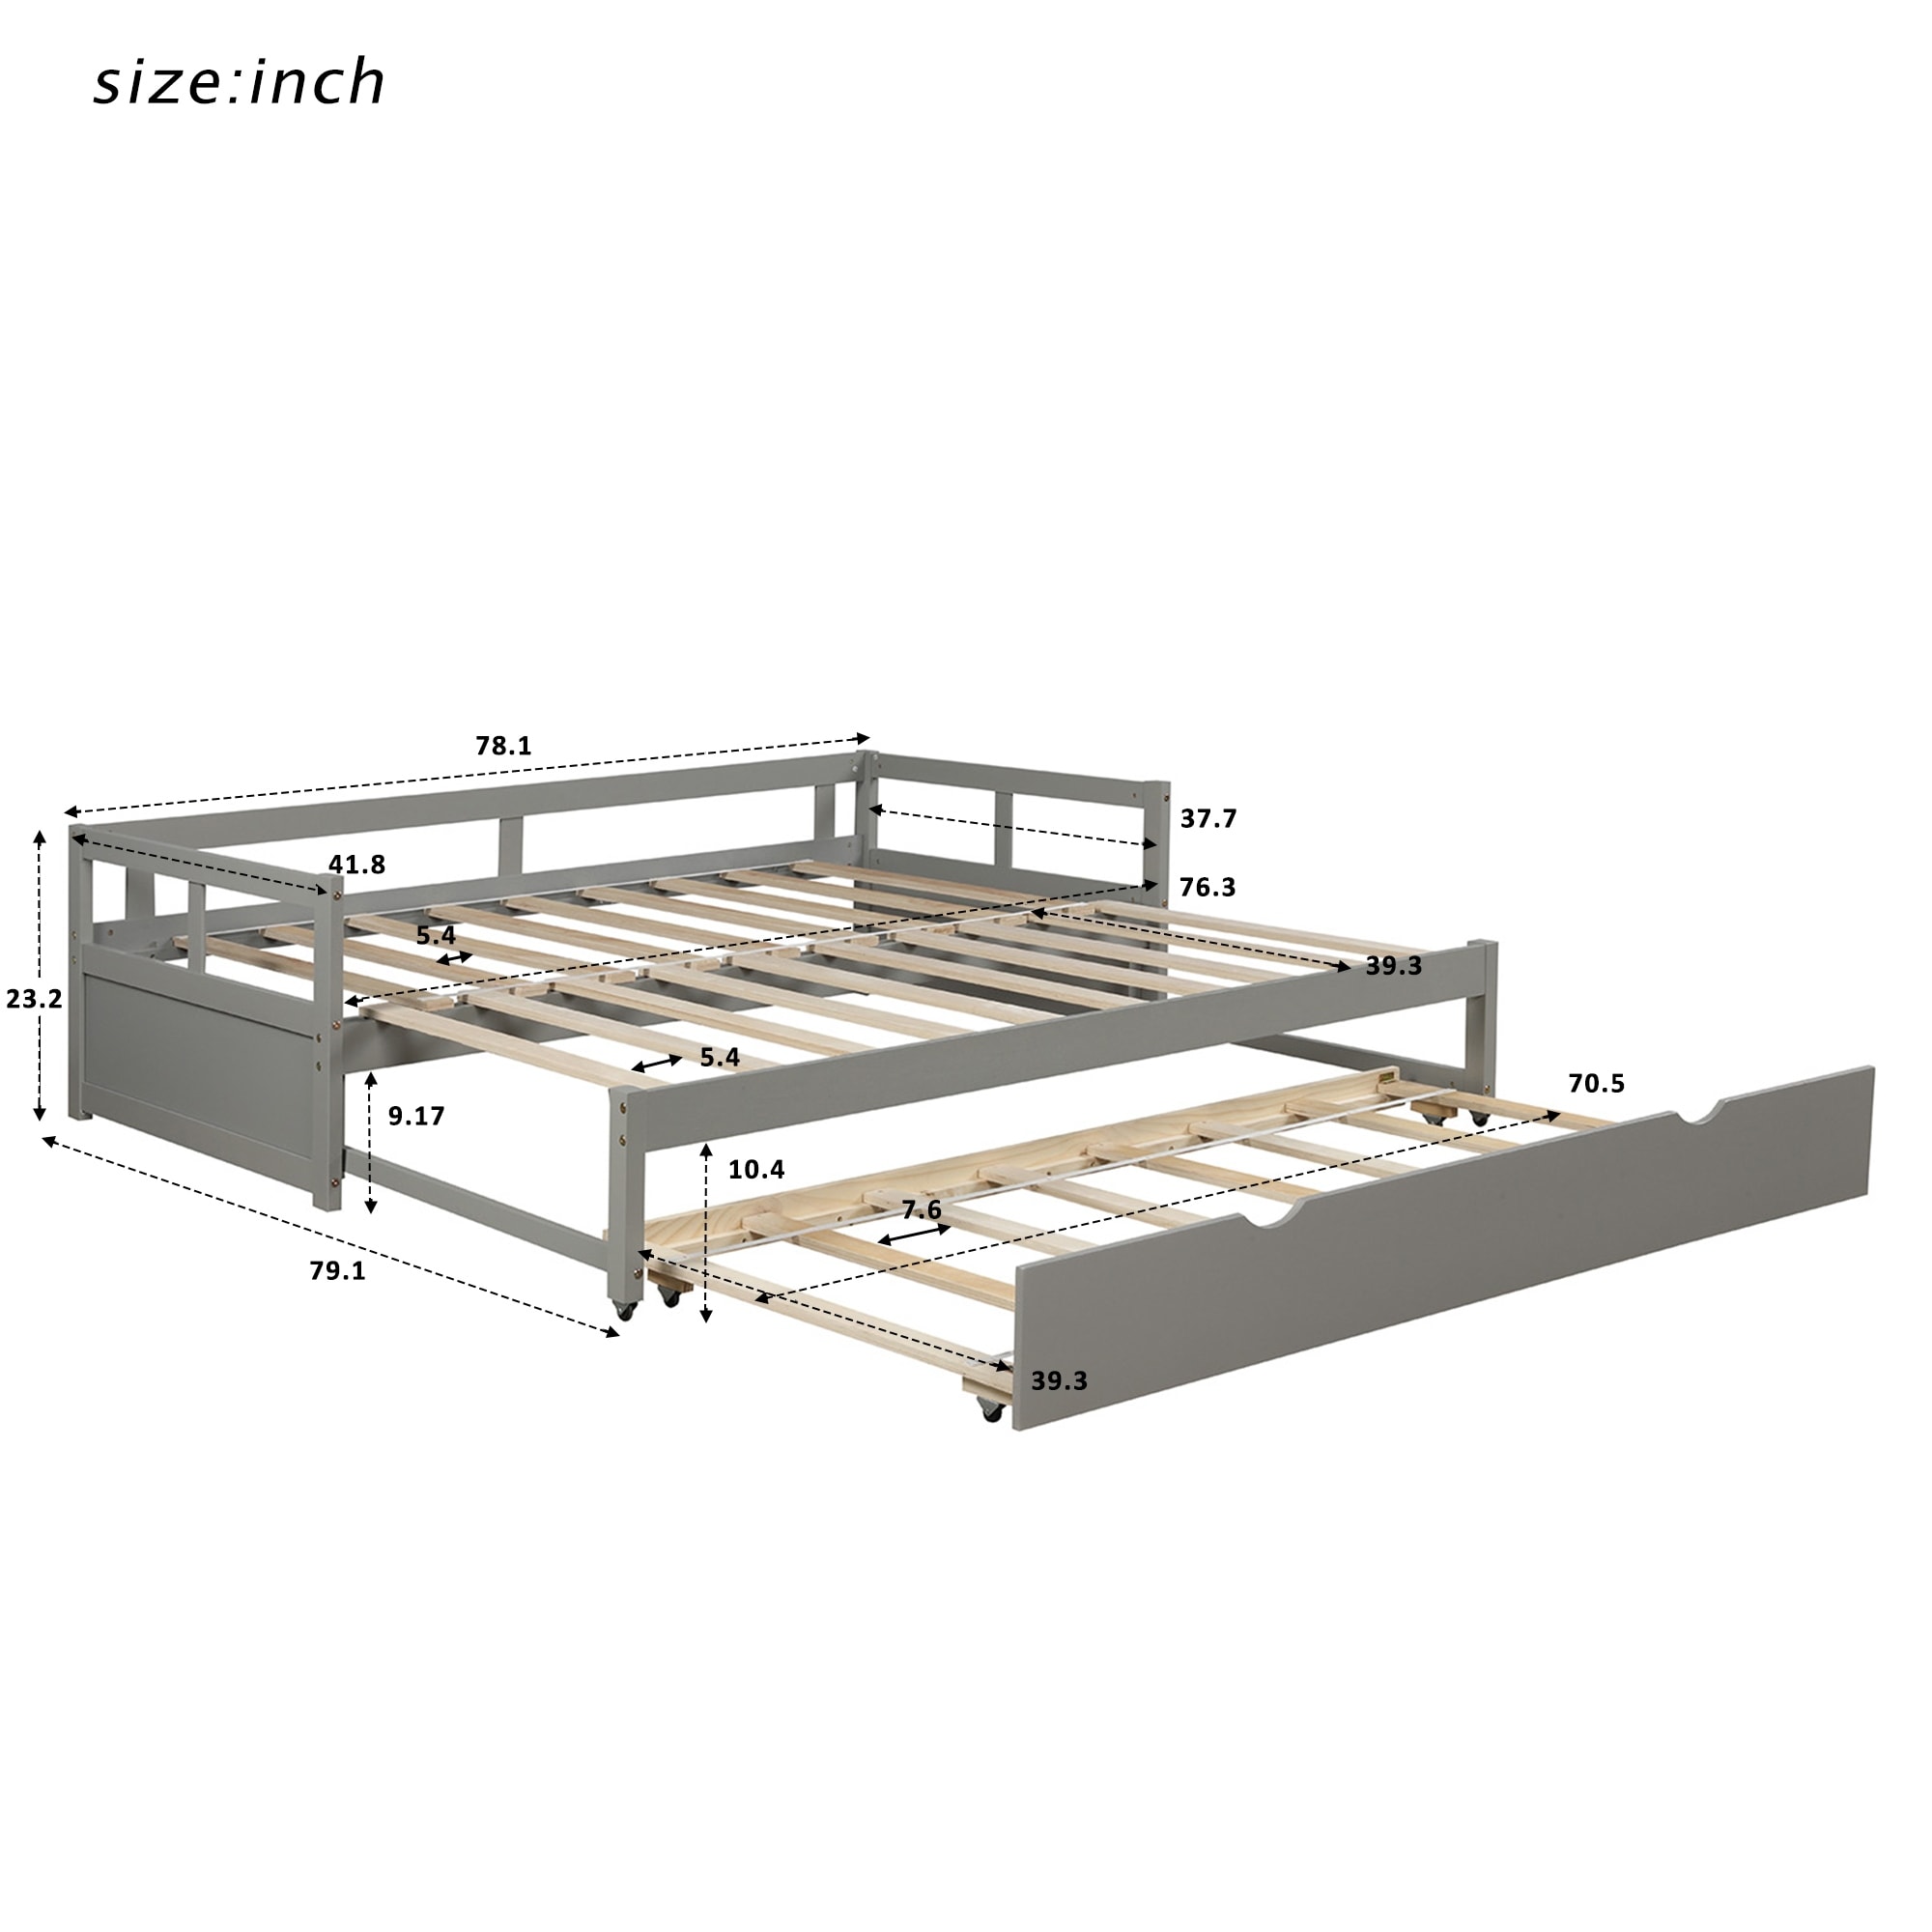 https://ak1.ostkcdn.com/images/products/is/images/direct/baa0d1b64a1dc4b2cb3e4a8e07250cb2b33bdfe8/Merax-Twin-King-Expandable-Sleeper-Daybed-with-Trundle.jpg